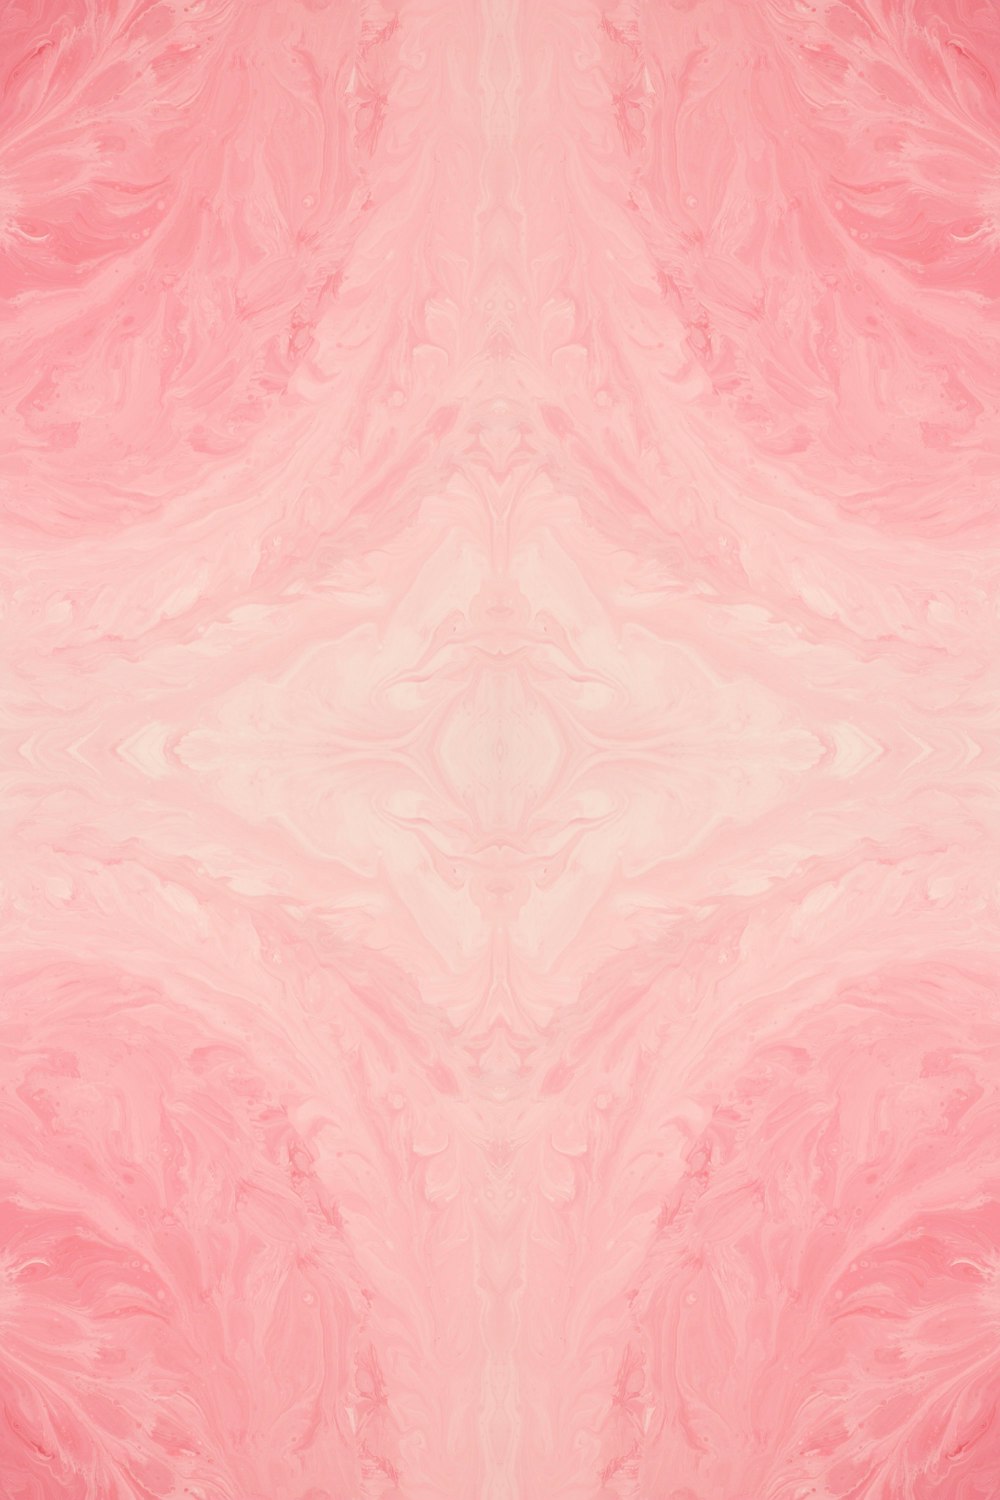 a pink and white background with a pattern